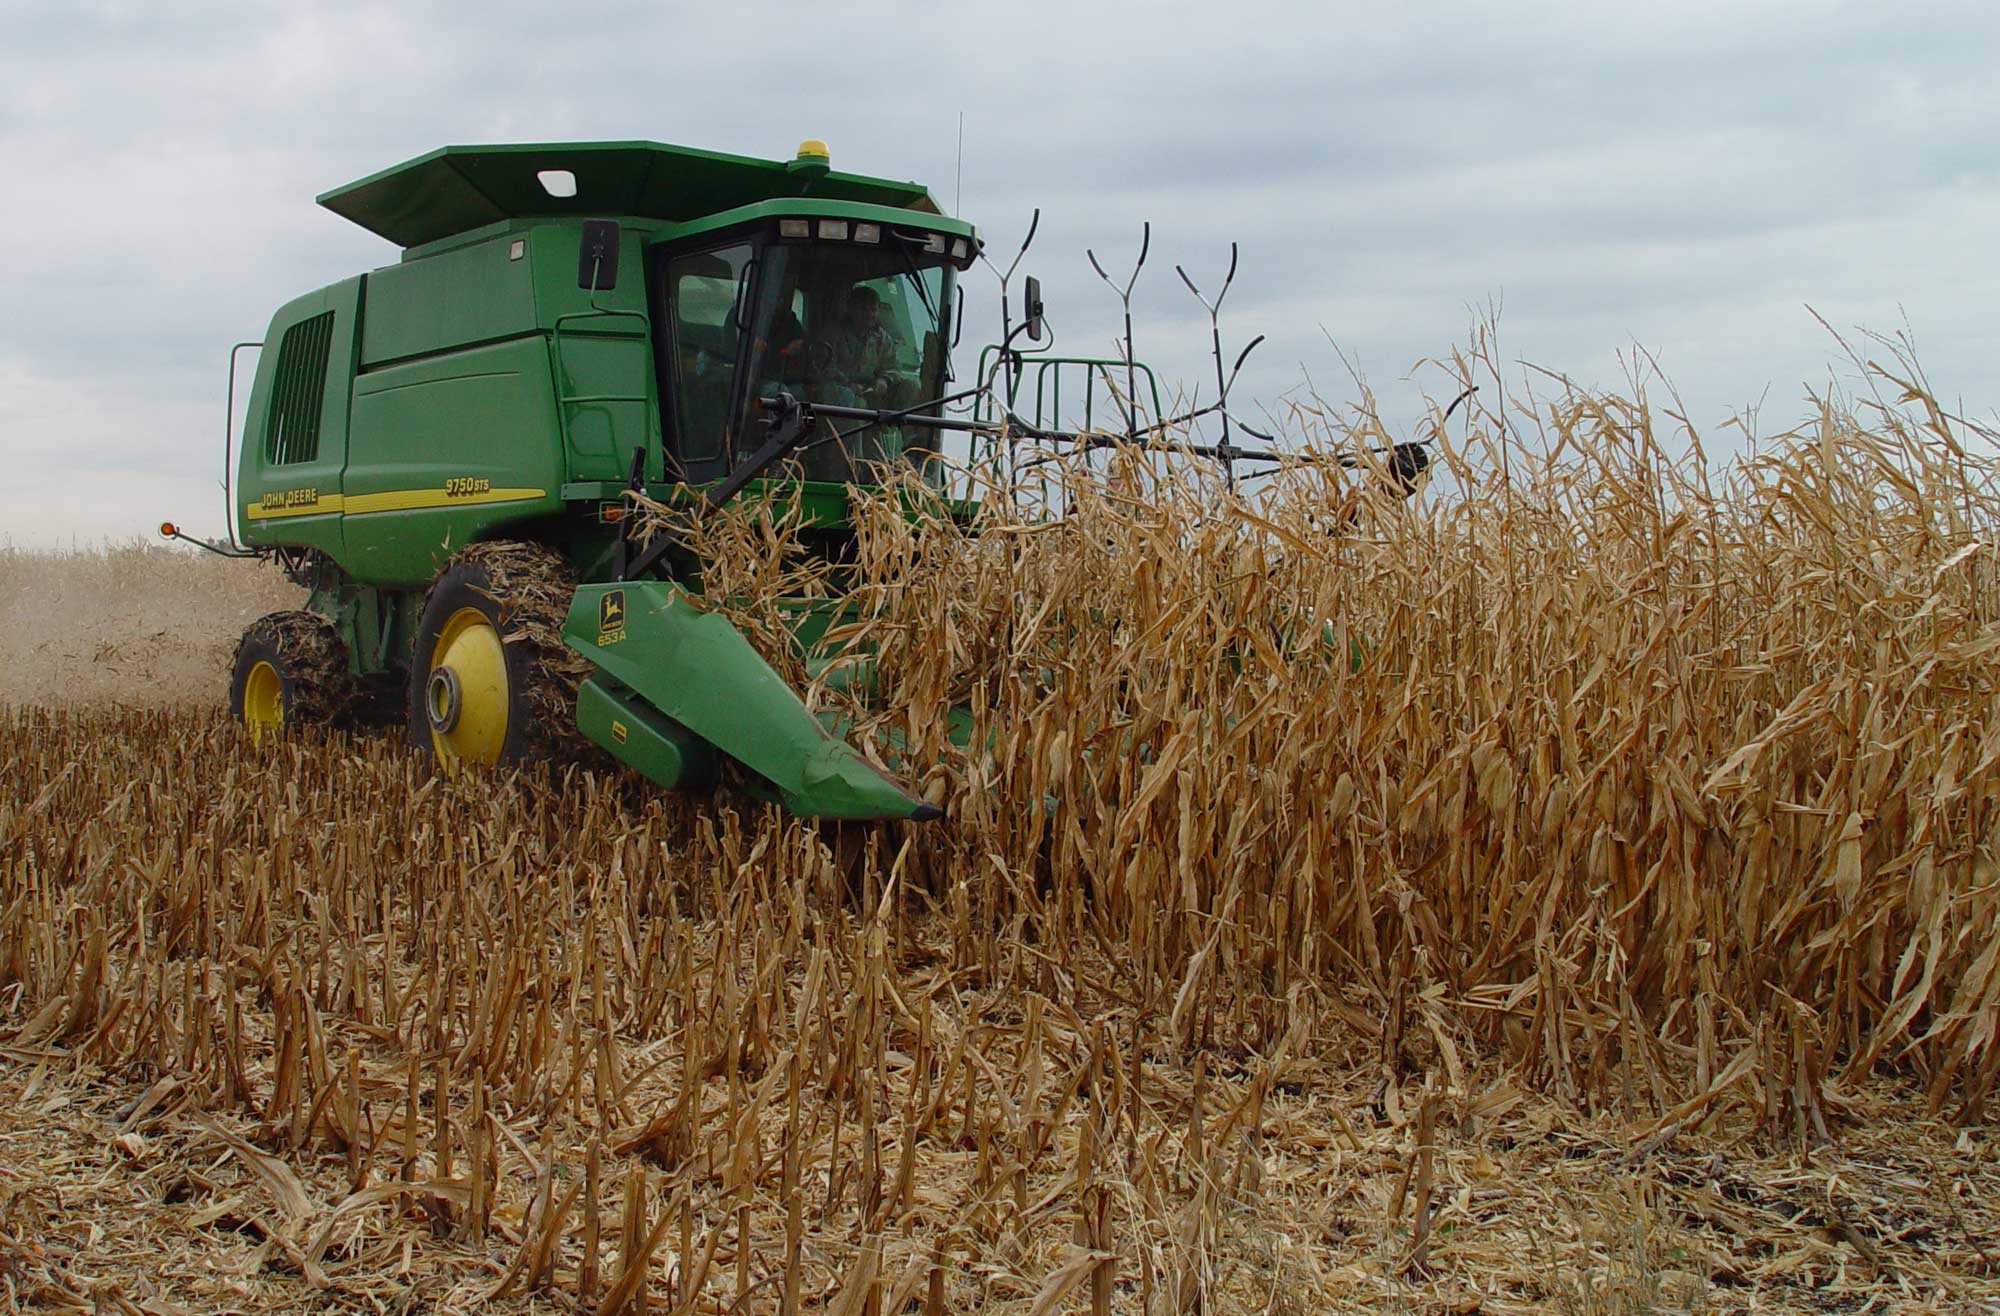 Photograph of a combine harvesting corn stover. The photo shows a rectangular green and yellow machine driving into rows of dried corn stalks. A harvested area with only corn stubble can be seen in the foreground.